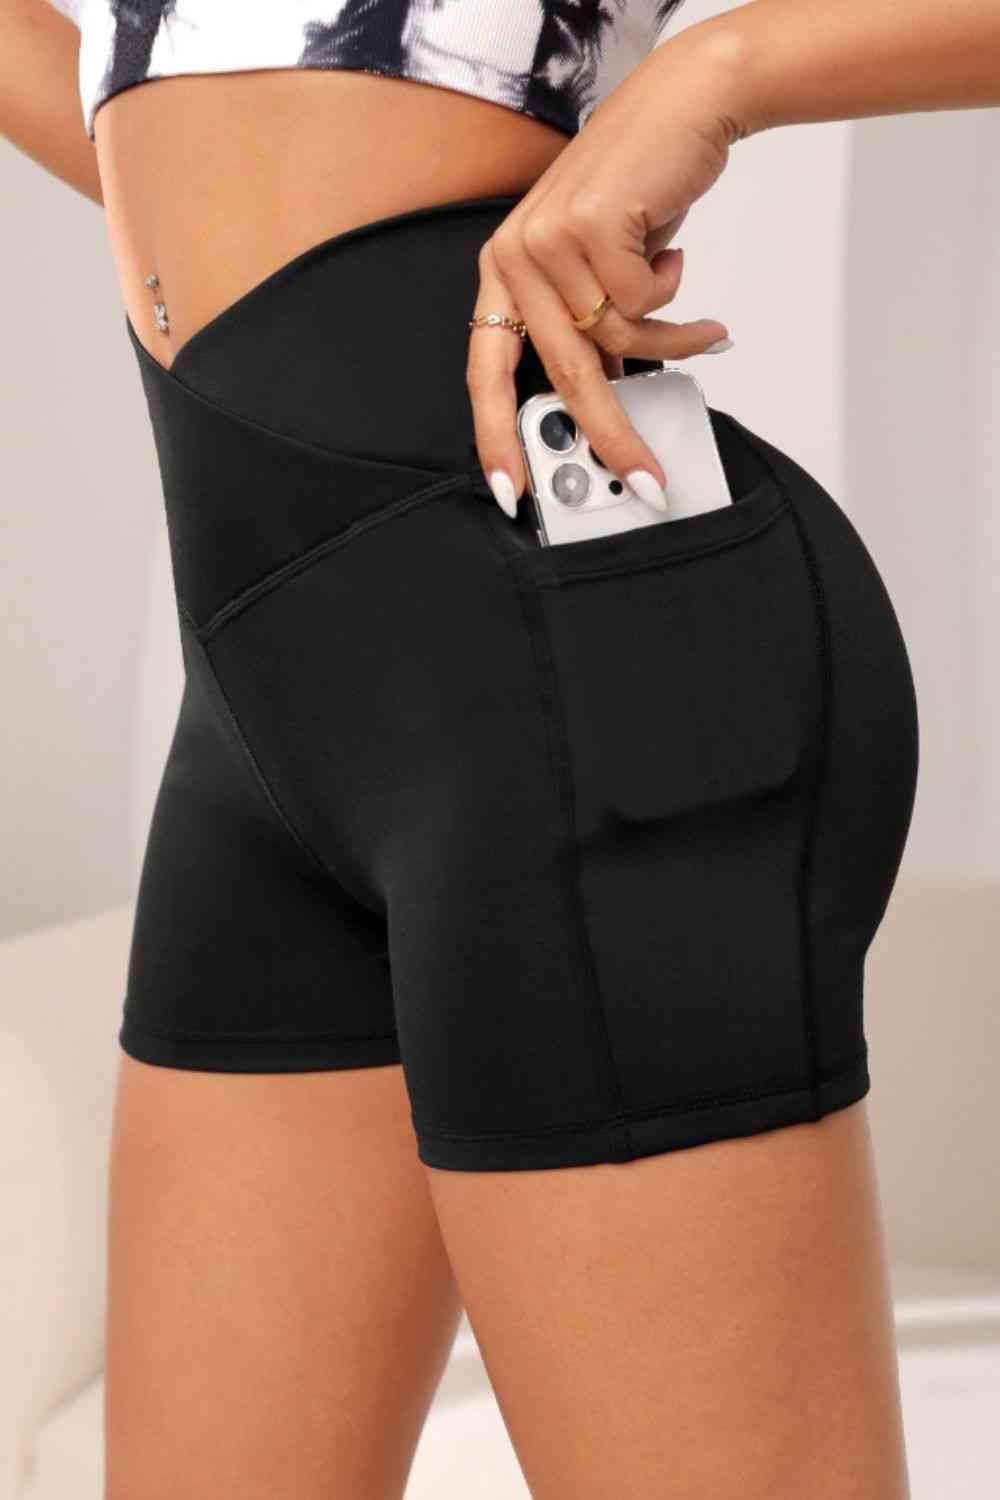 The802Gypsy Activewear GYPSY-Wide Waistband Active Shorts with Pocket